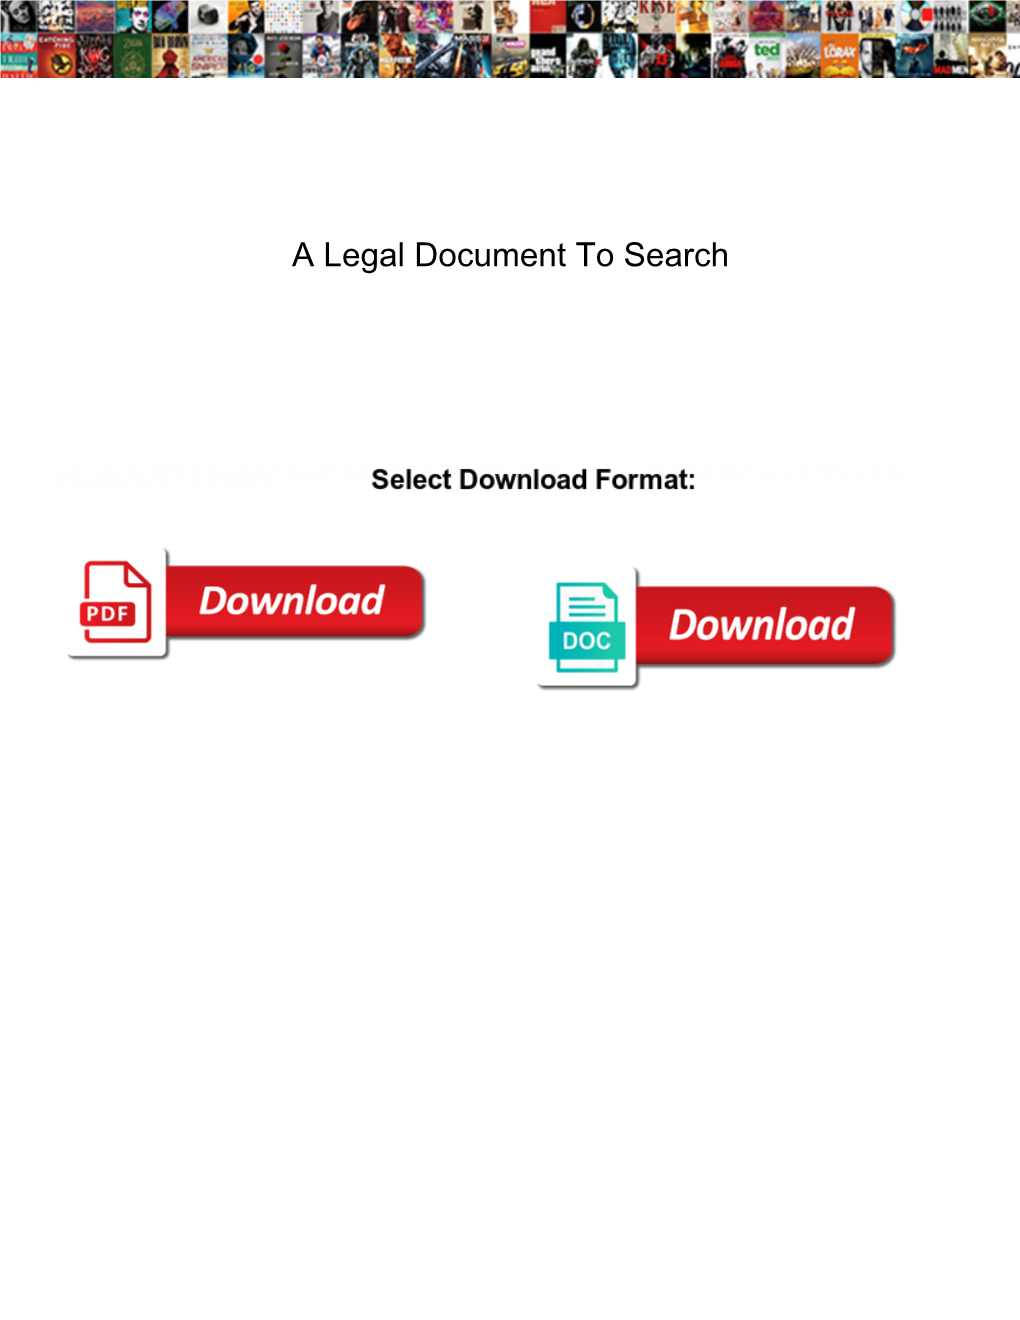 A Legal Document to Search